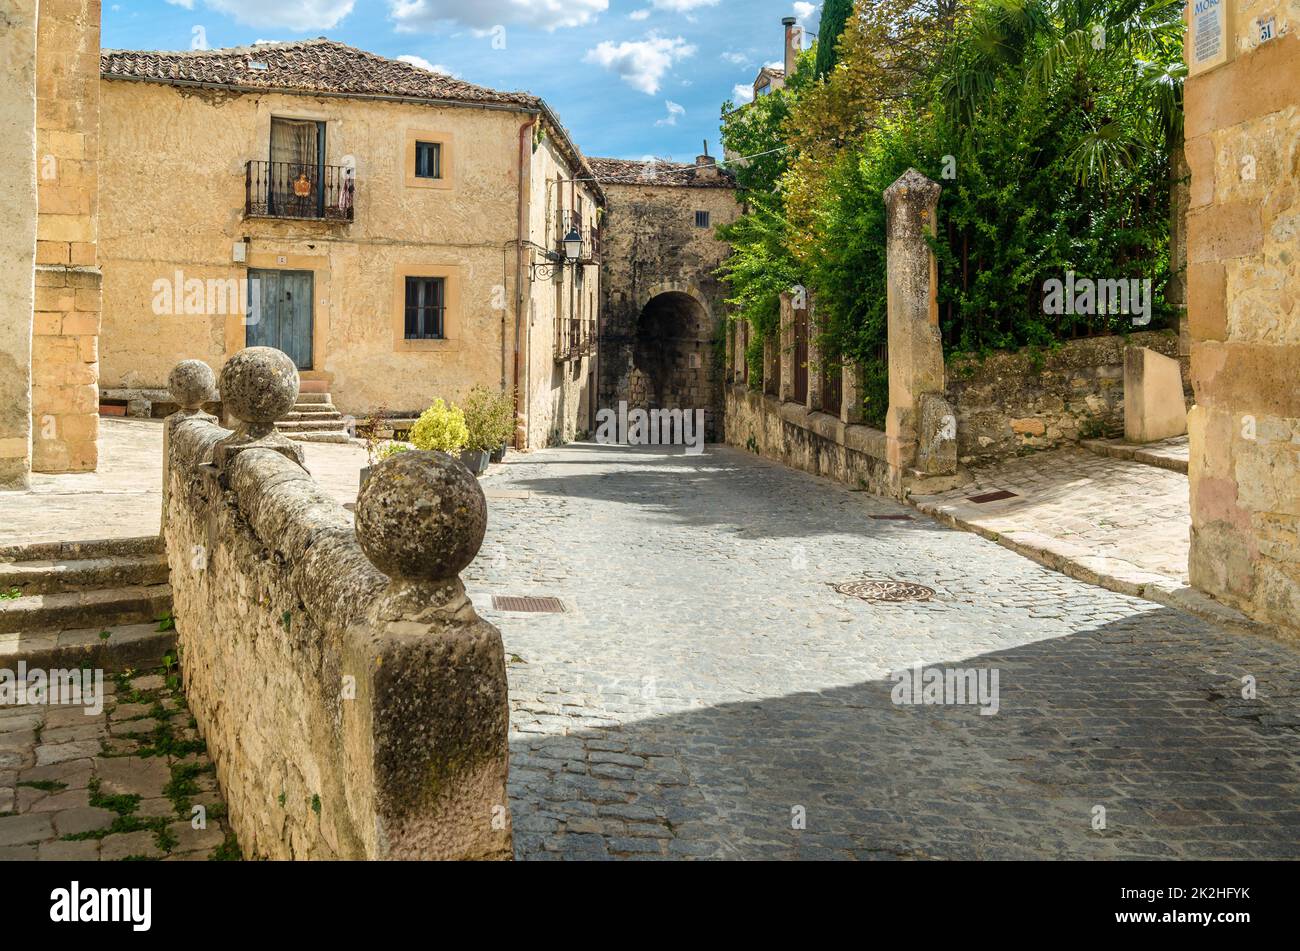 Architecture in the medieval village of Sepulveda, Castile and Leon, Spain Stock Photo